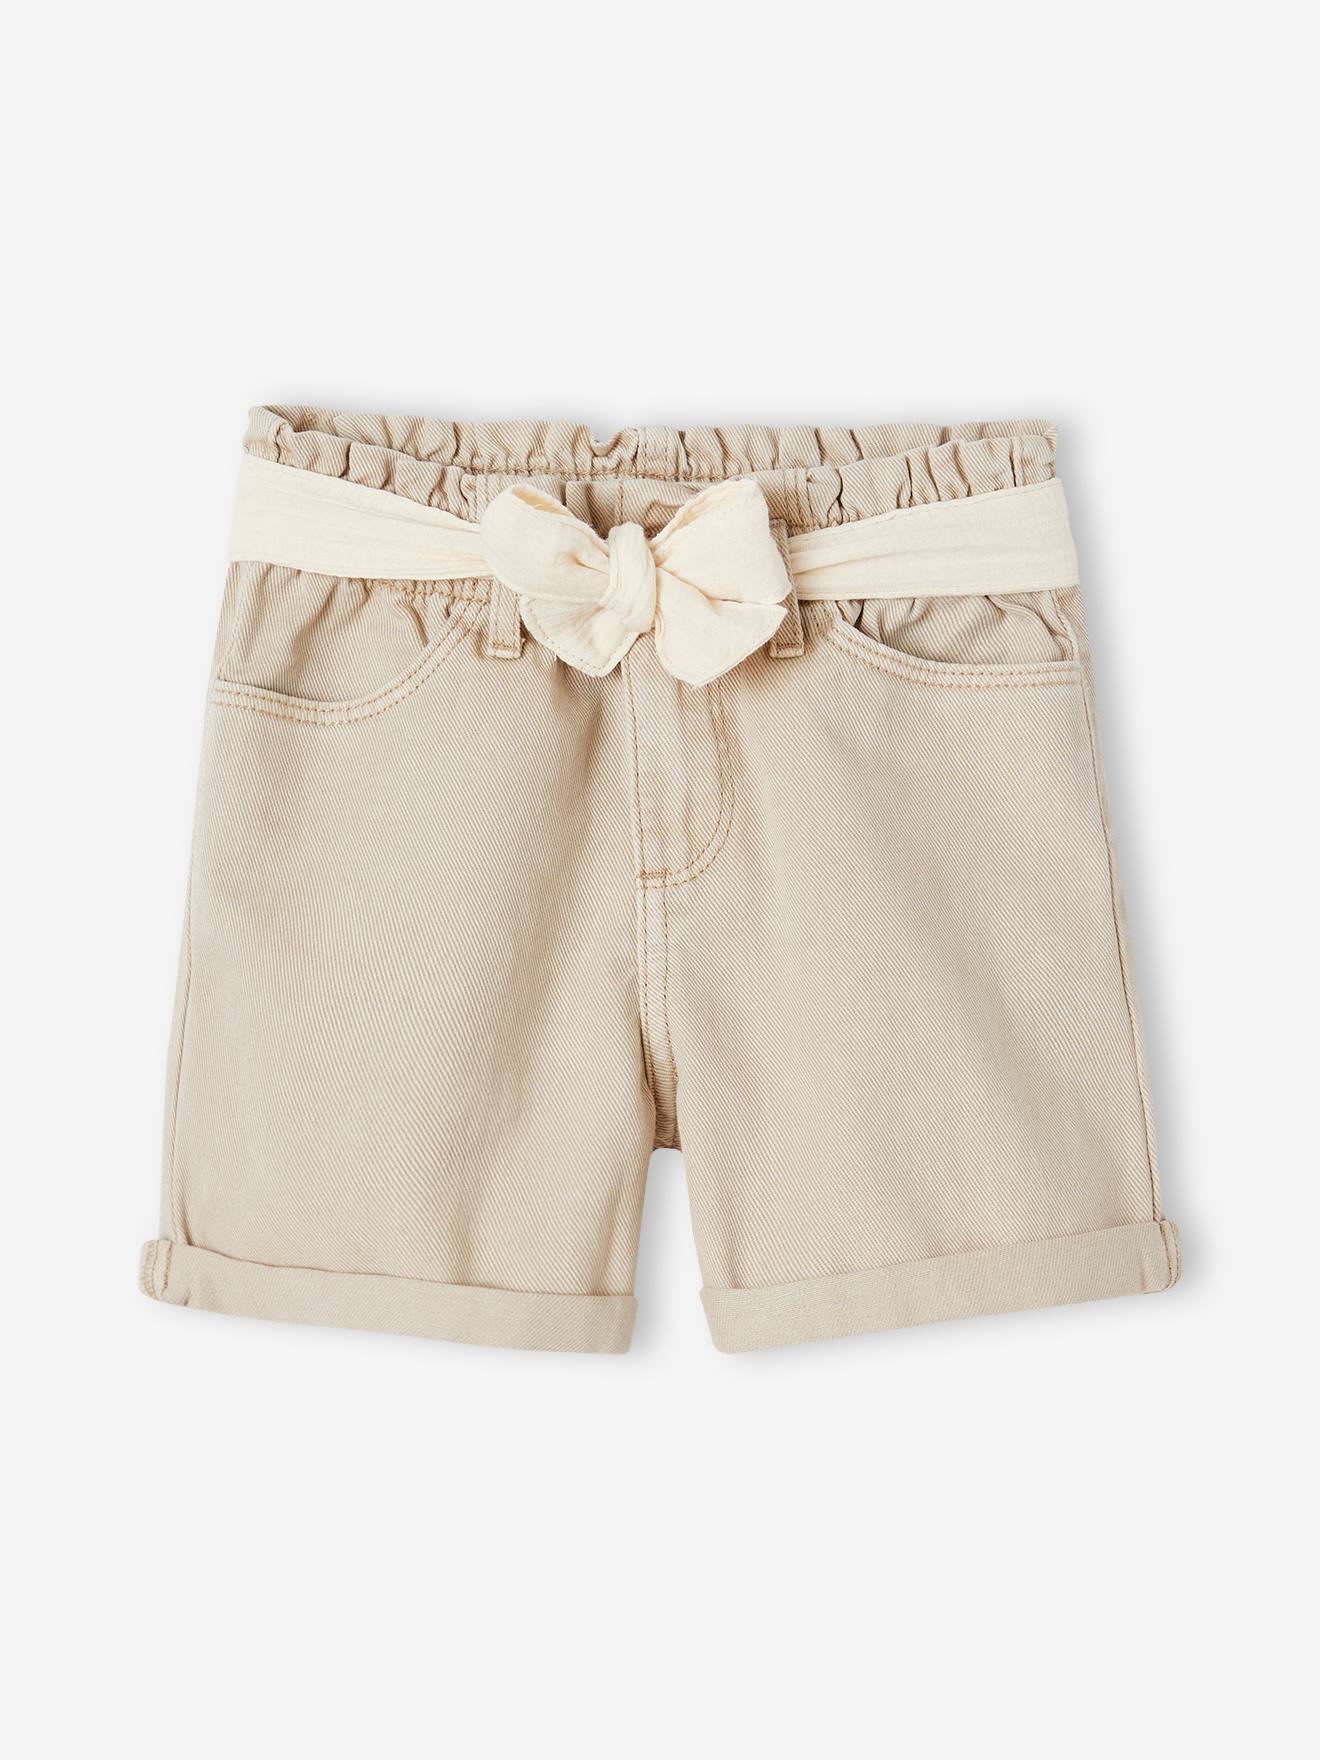 Paperbag Shorts in Cotton Gauze, with Belt, for Girls sandy beige